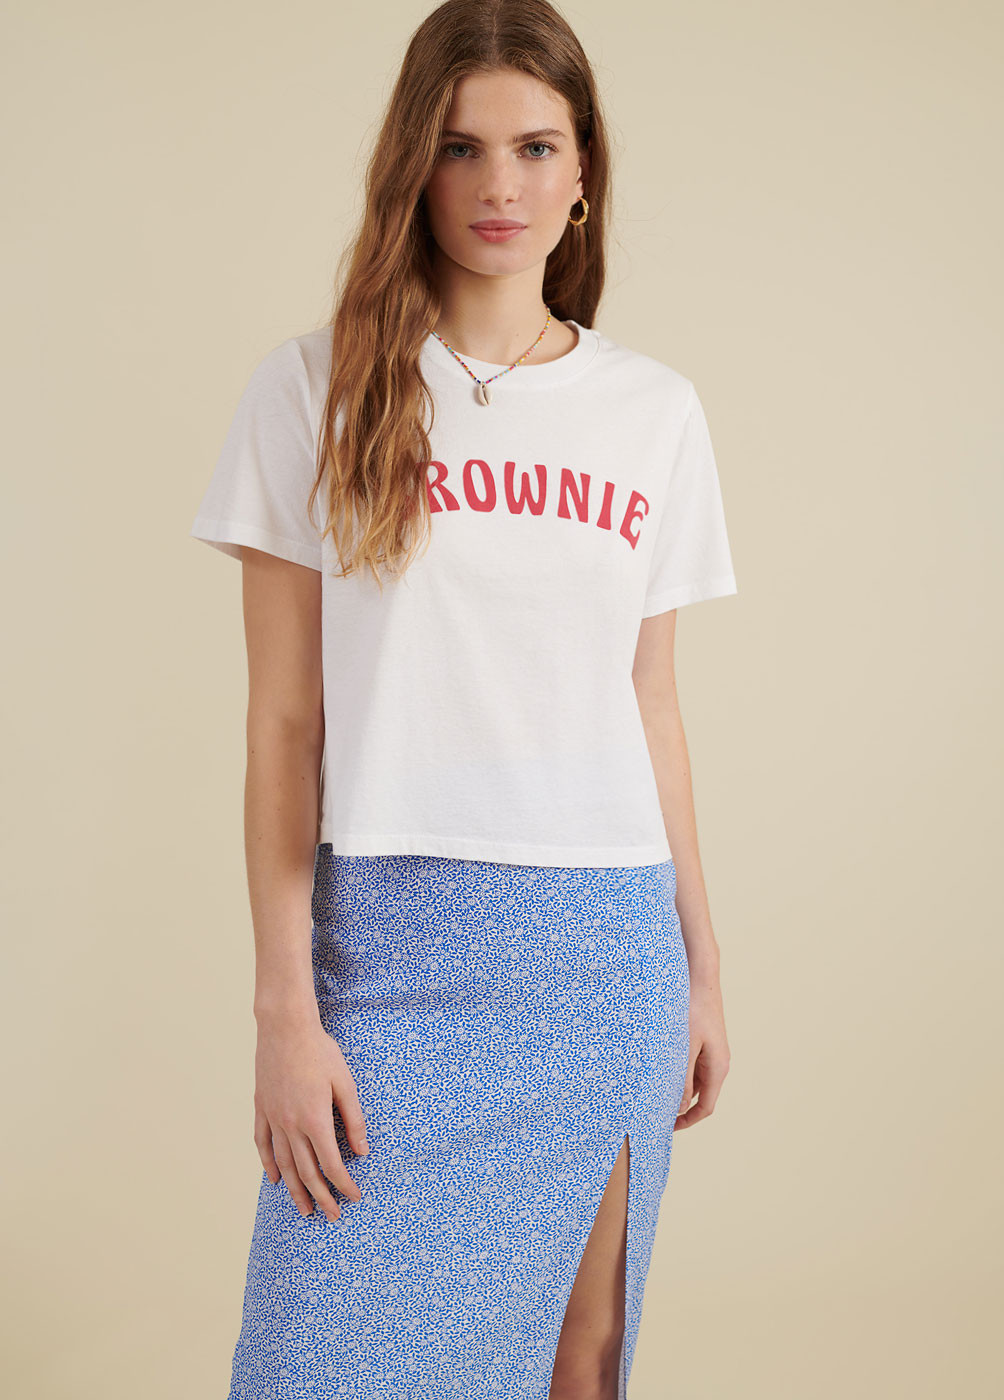 T-SHIRT SKY BROWNIE MANCHES COURTES